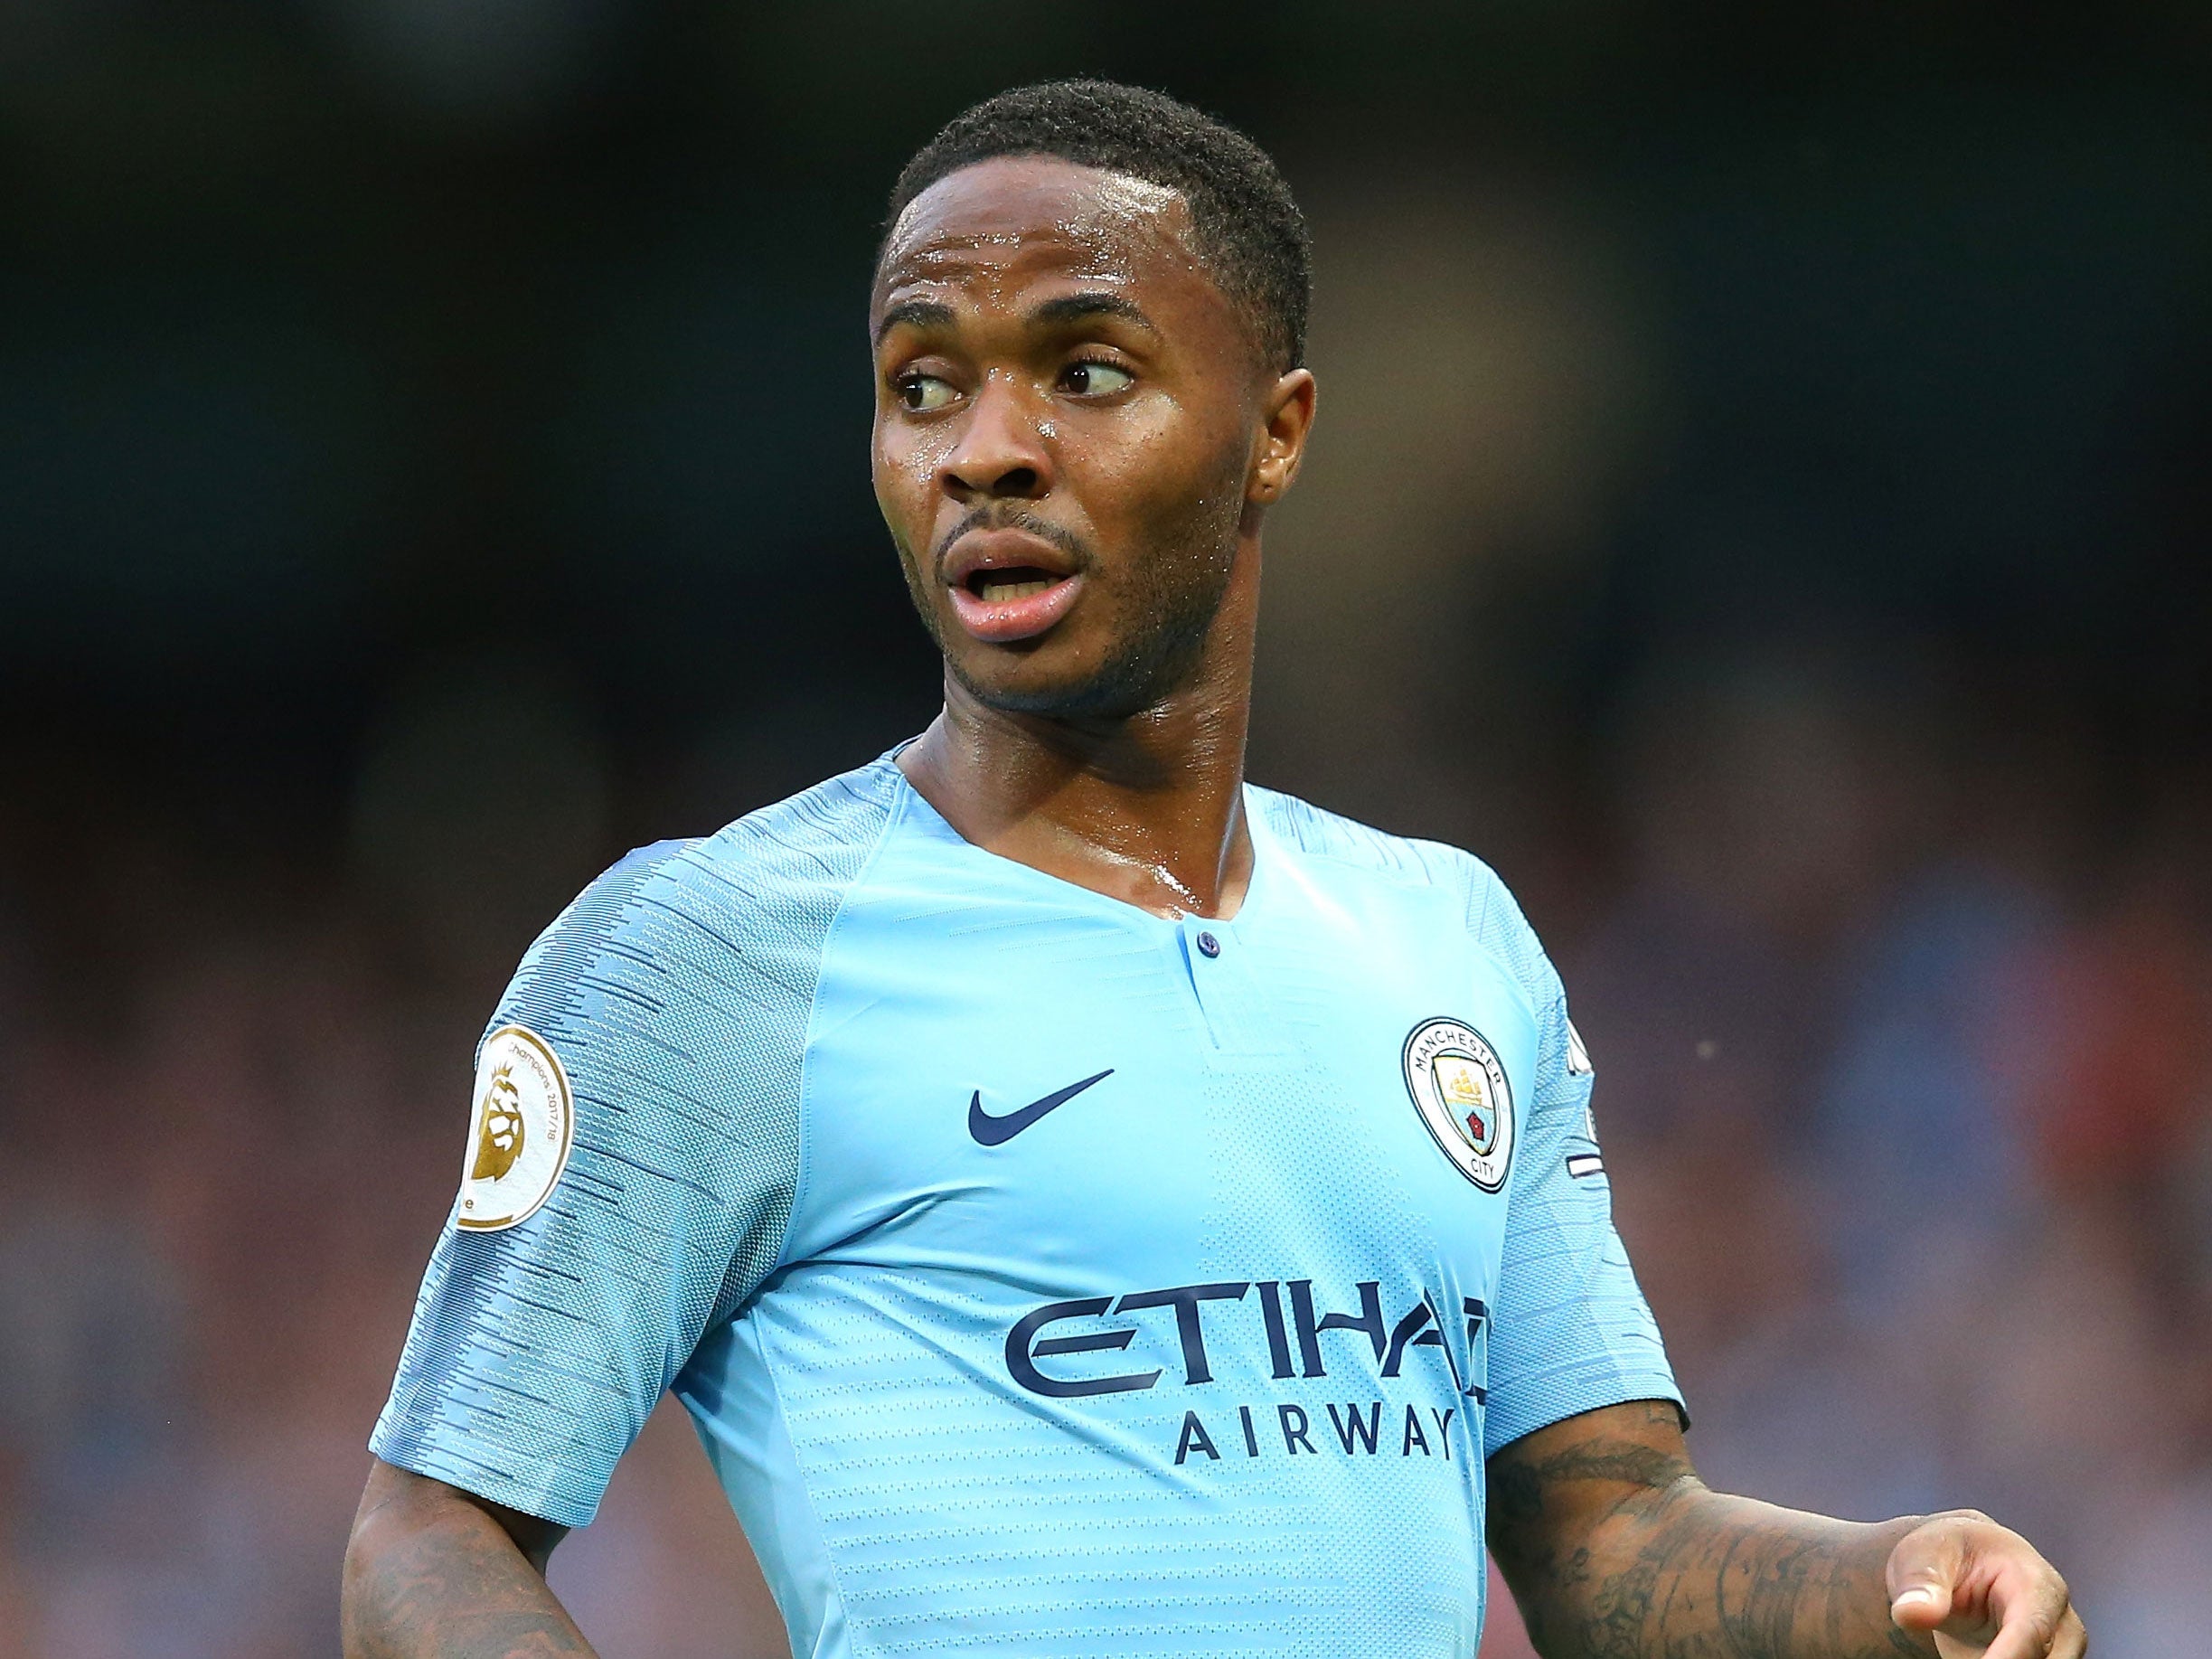 Pep Guardiola heaps praise on Raheem Sterling as contract negotiations continue to stall